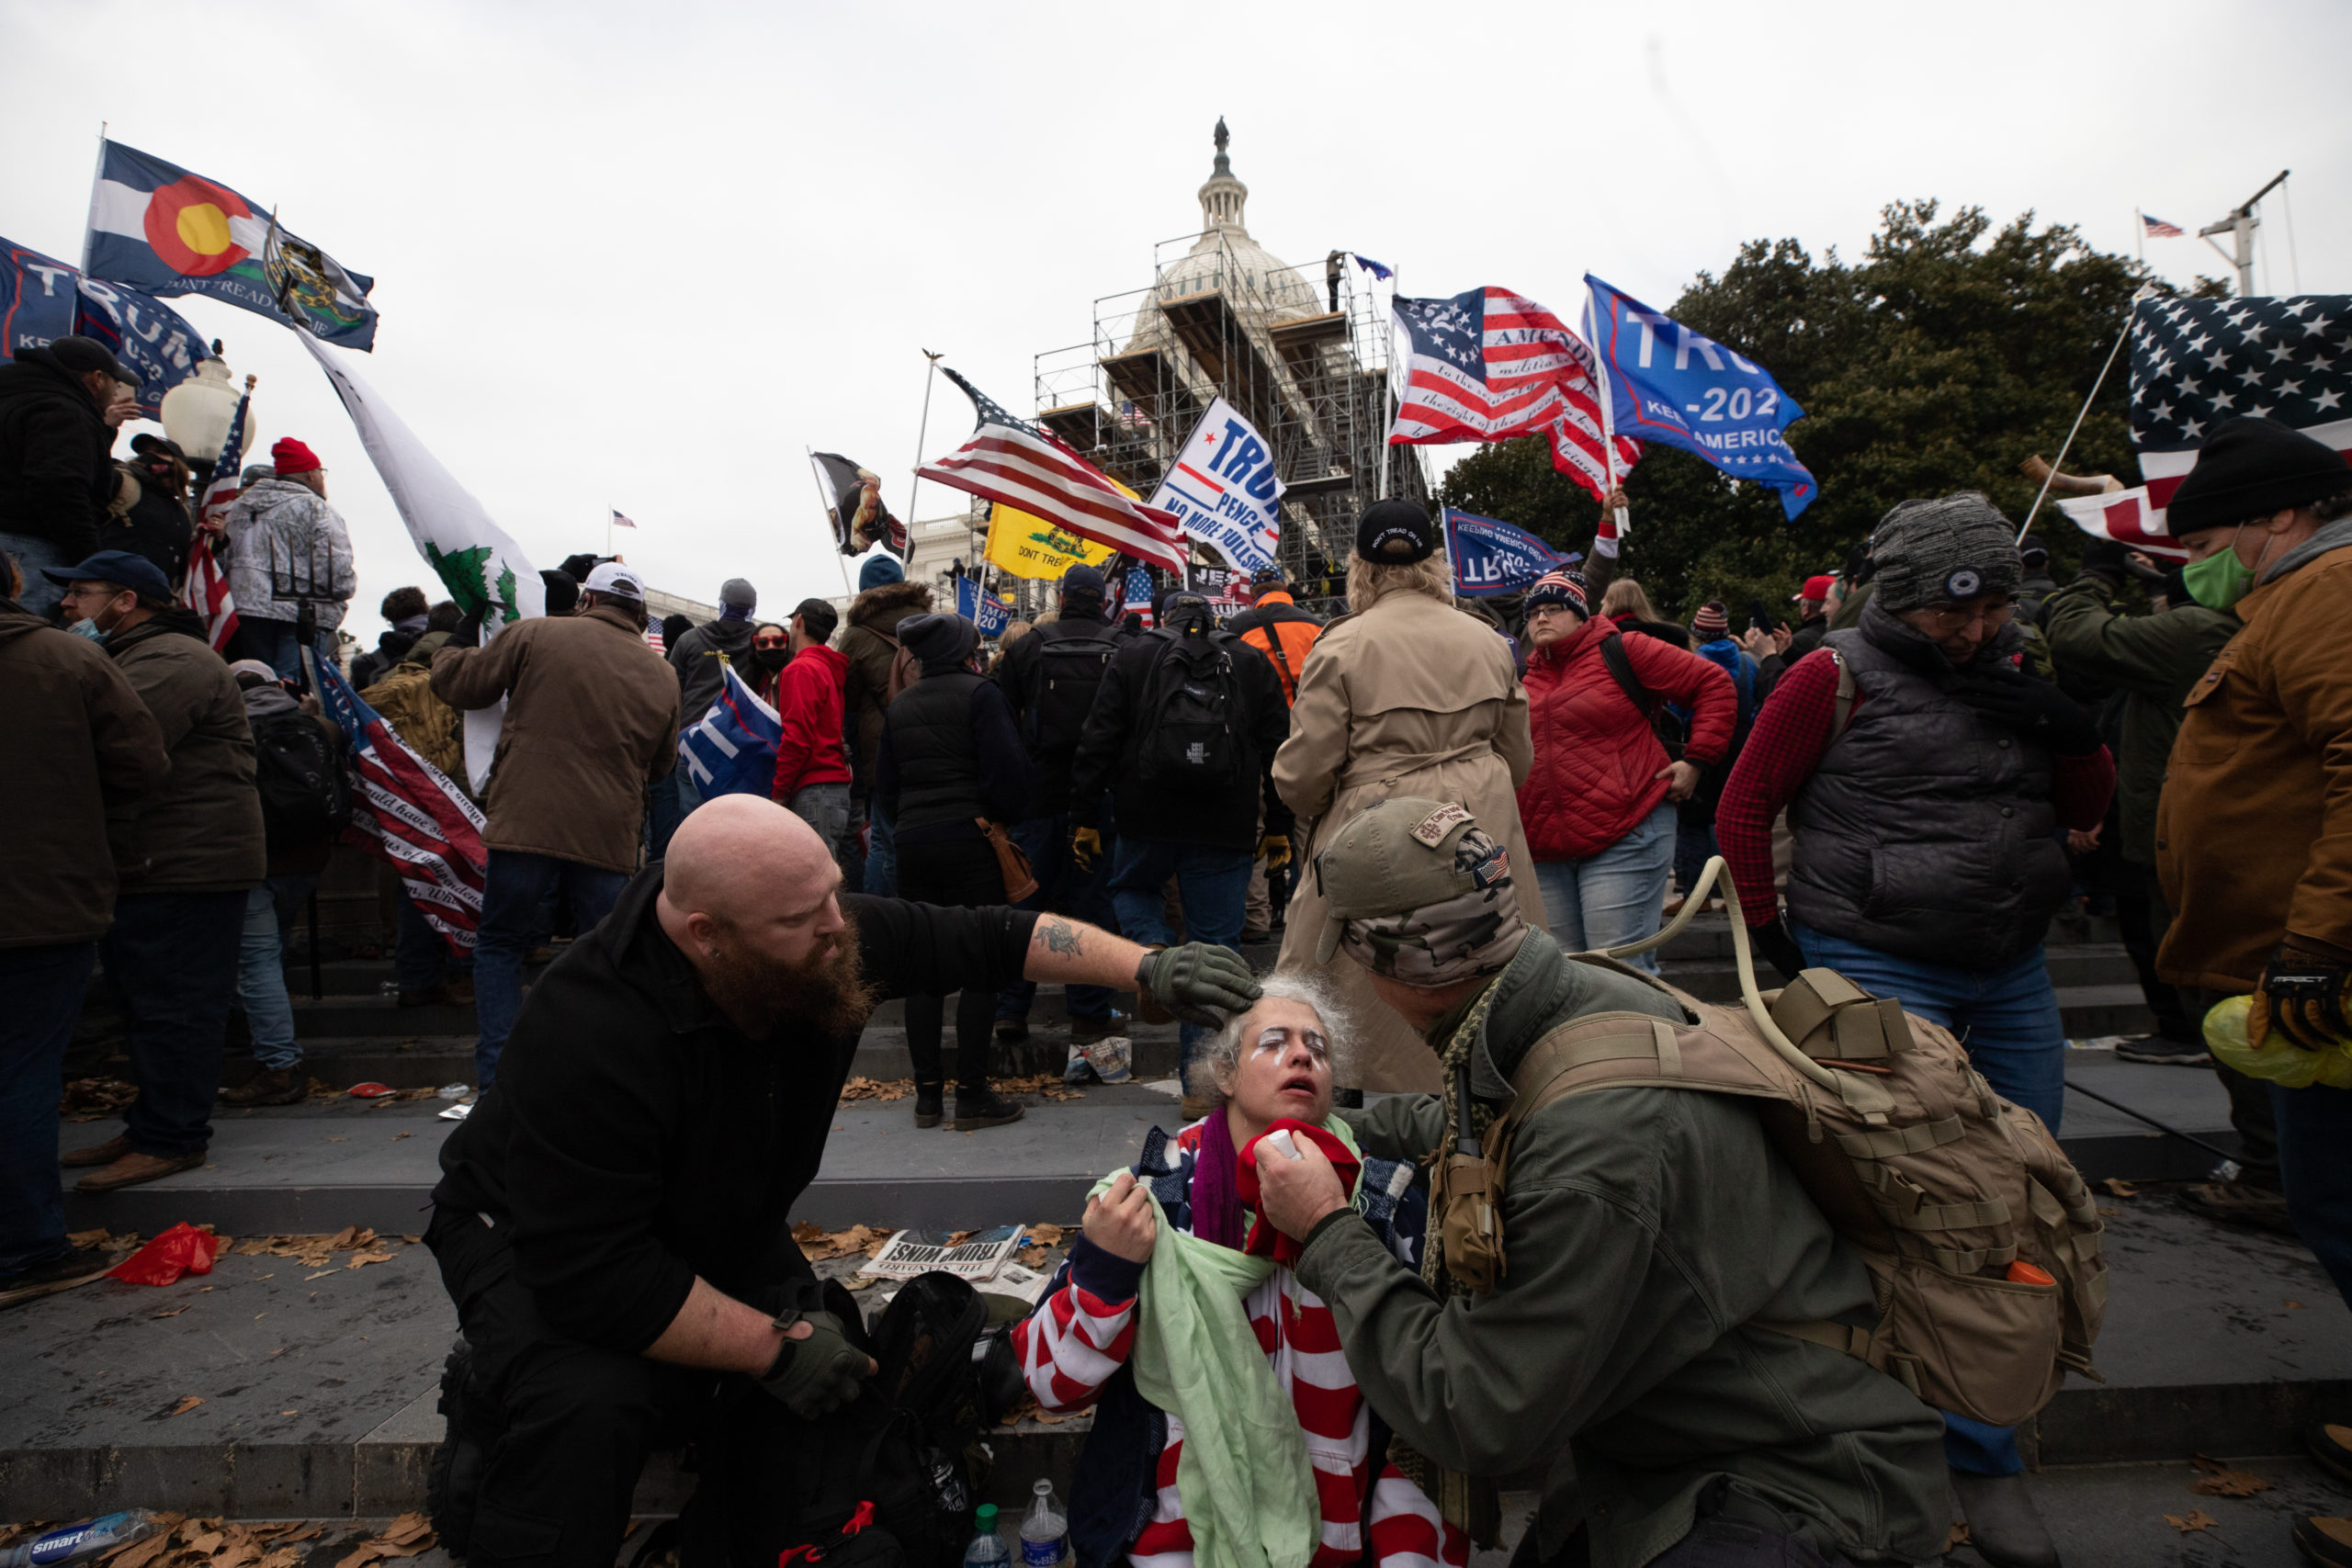 Law enforcement officials deployed several rounds of tear gas in Washington, D.C. on Jan. 6, 2021. (Kaylee Greenlee - Daily Caller News Foundation)